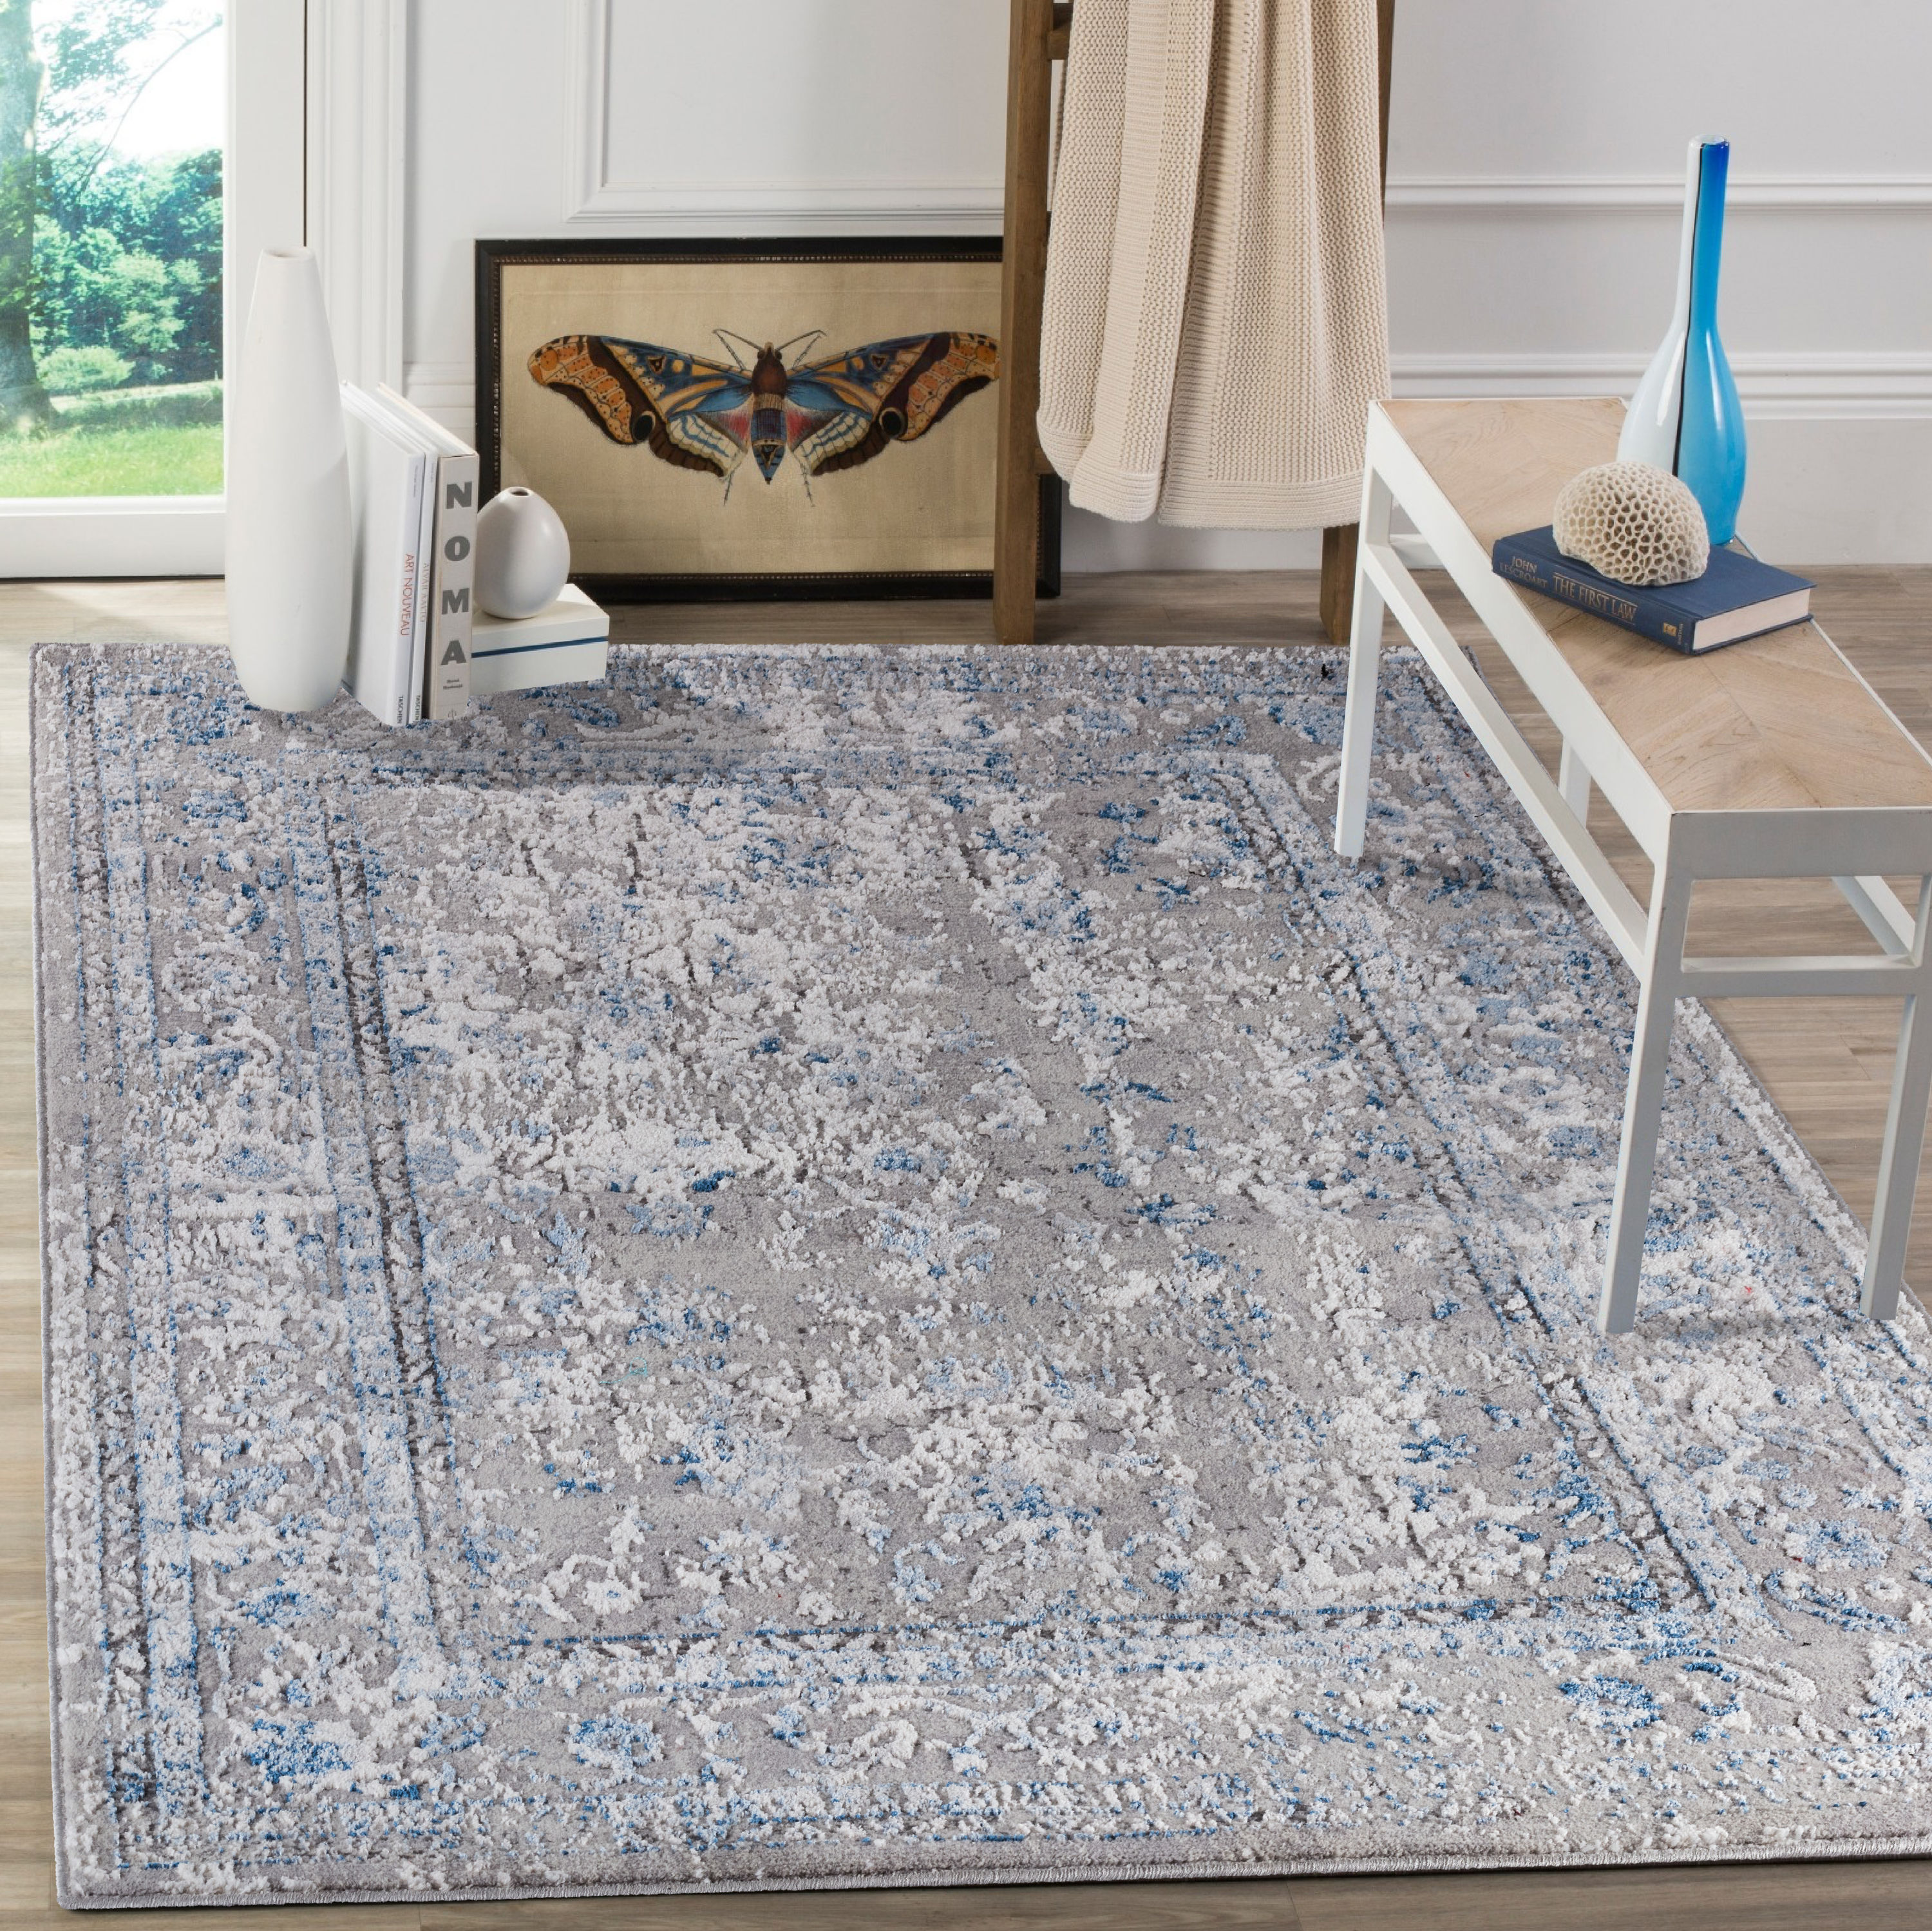 The Sofia Rugs Absorbent and Non-Slip 2 Piece Kitchen Rug Set - 20-inx48-in  and 20-inx30-in - Machine Washable - High-Traffic Area Rugs for Entryways  and Bathrooms in the Bathroom Rugs & Mats